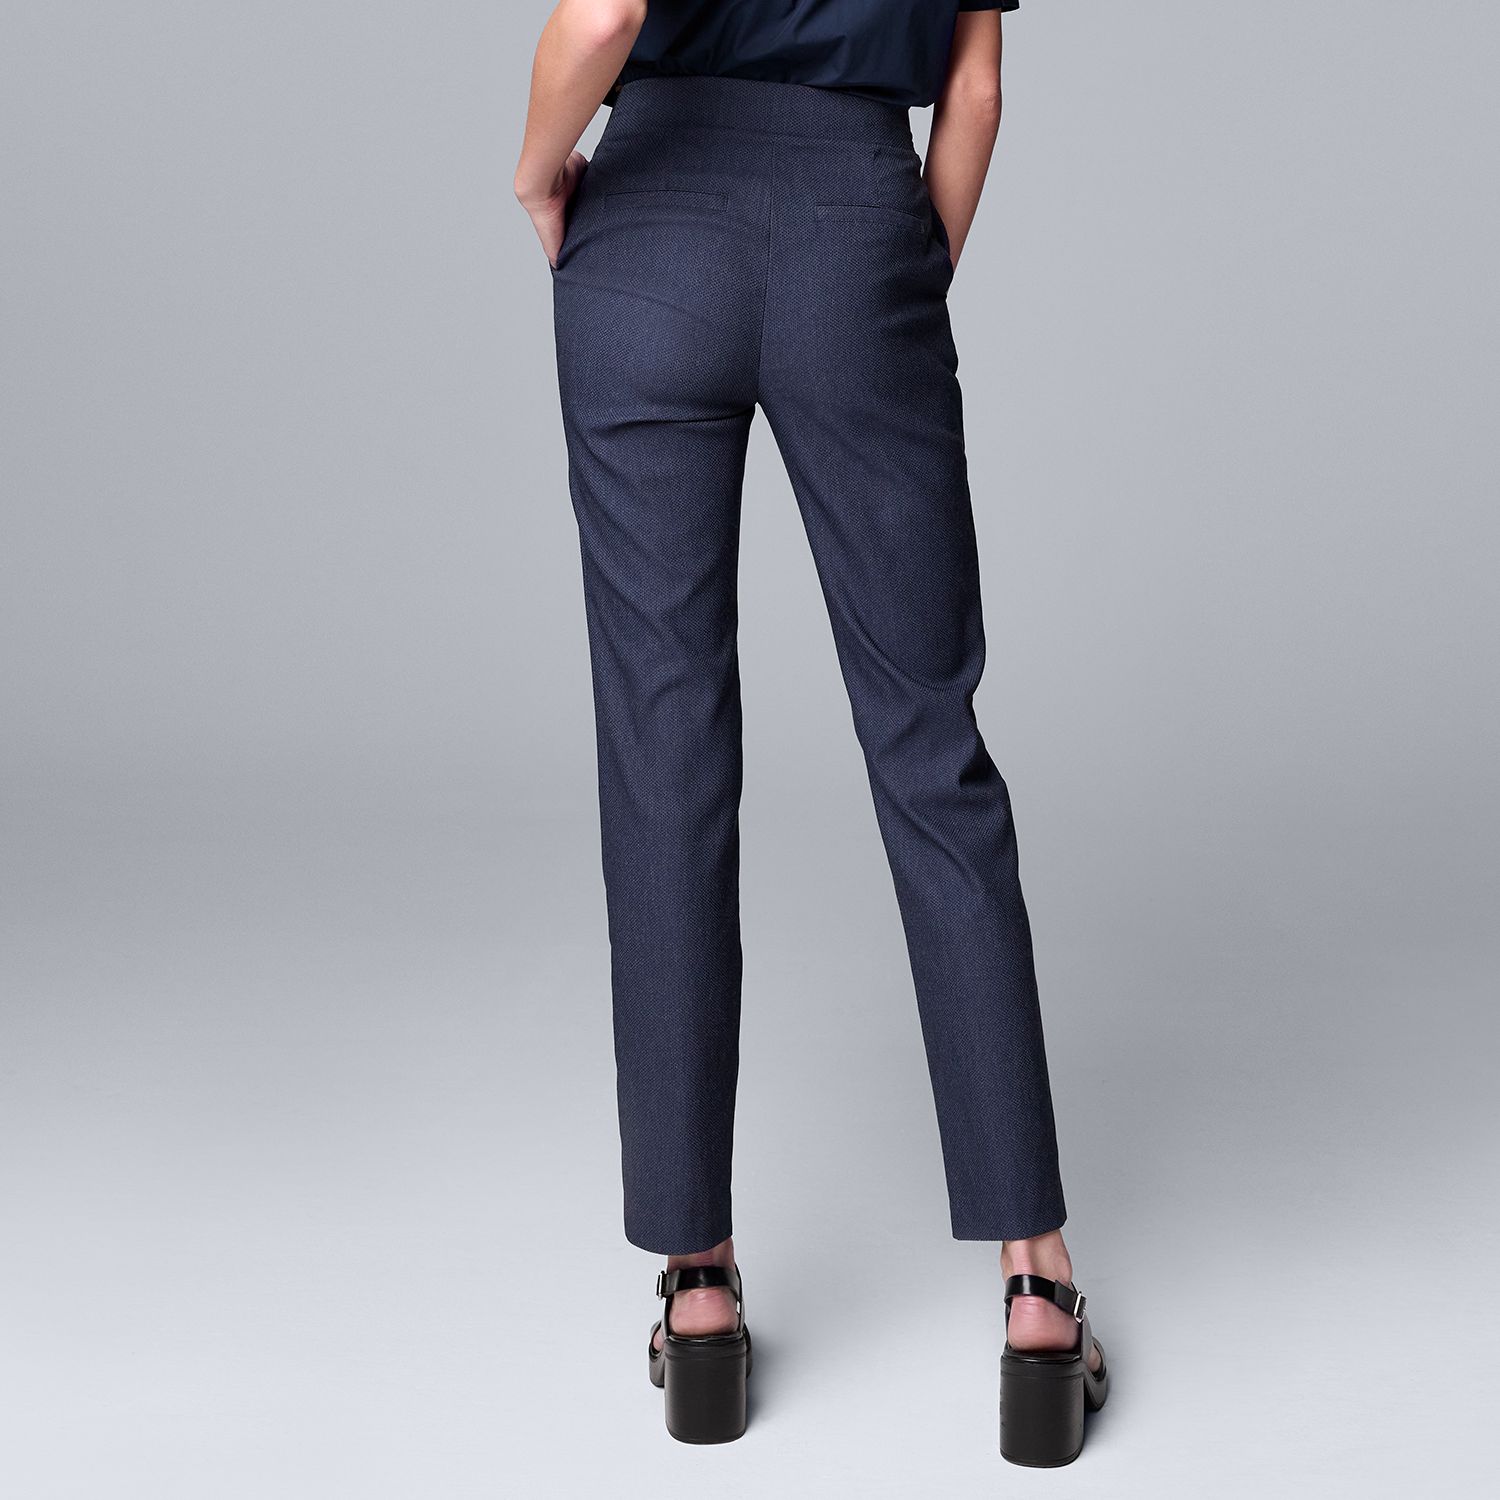 Simply Vera Vera Wang stretch pull on pants. Come in navy, purple